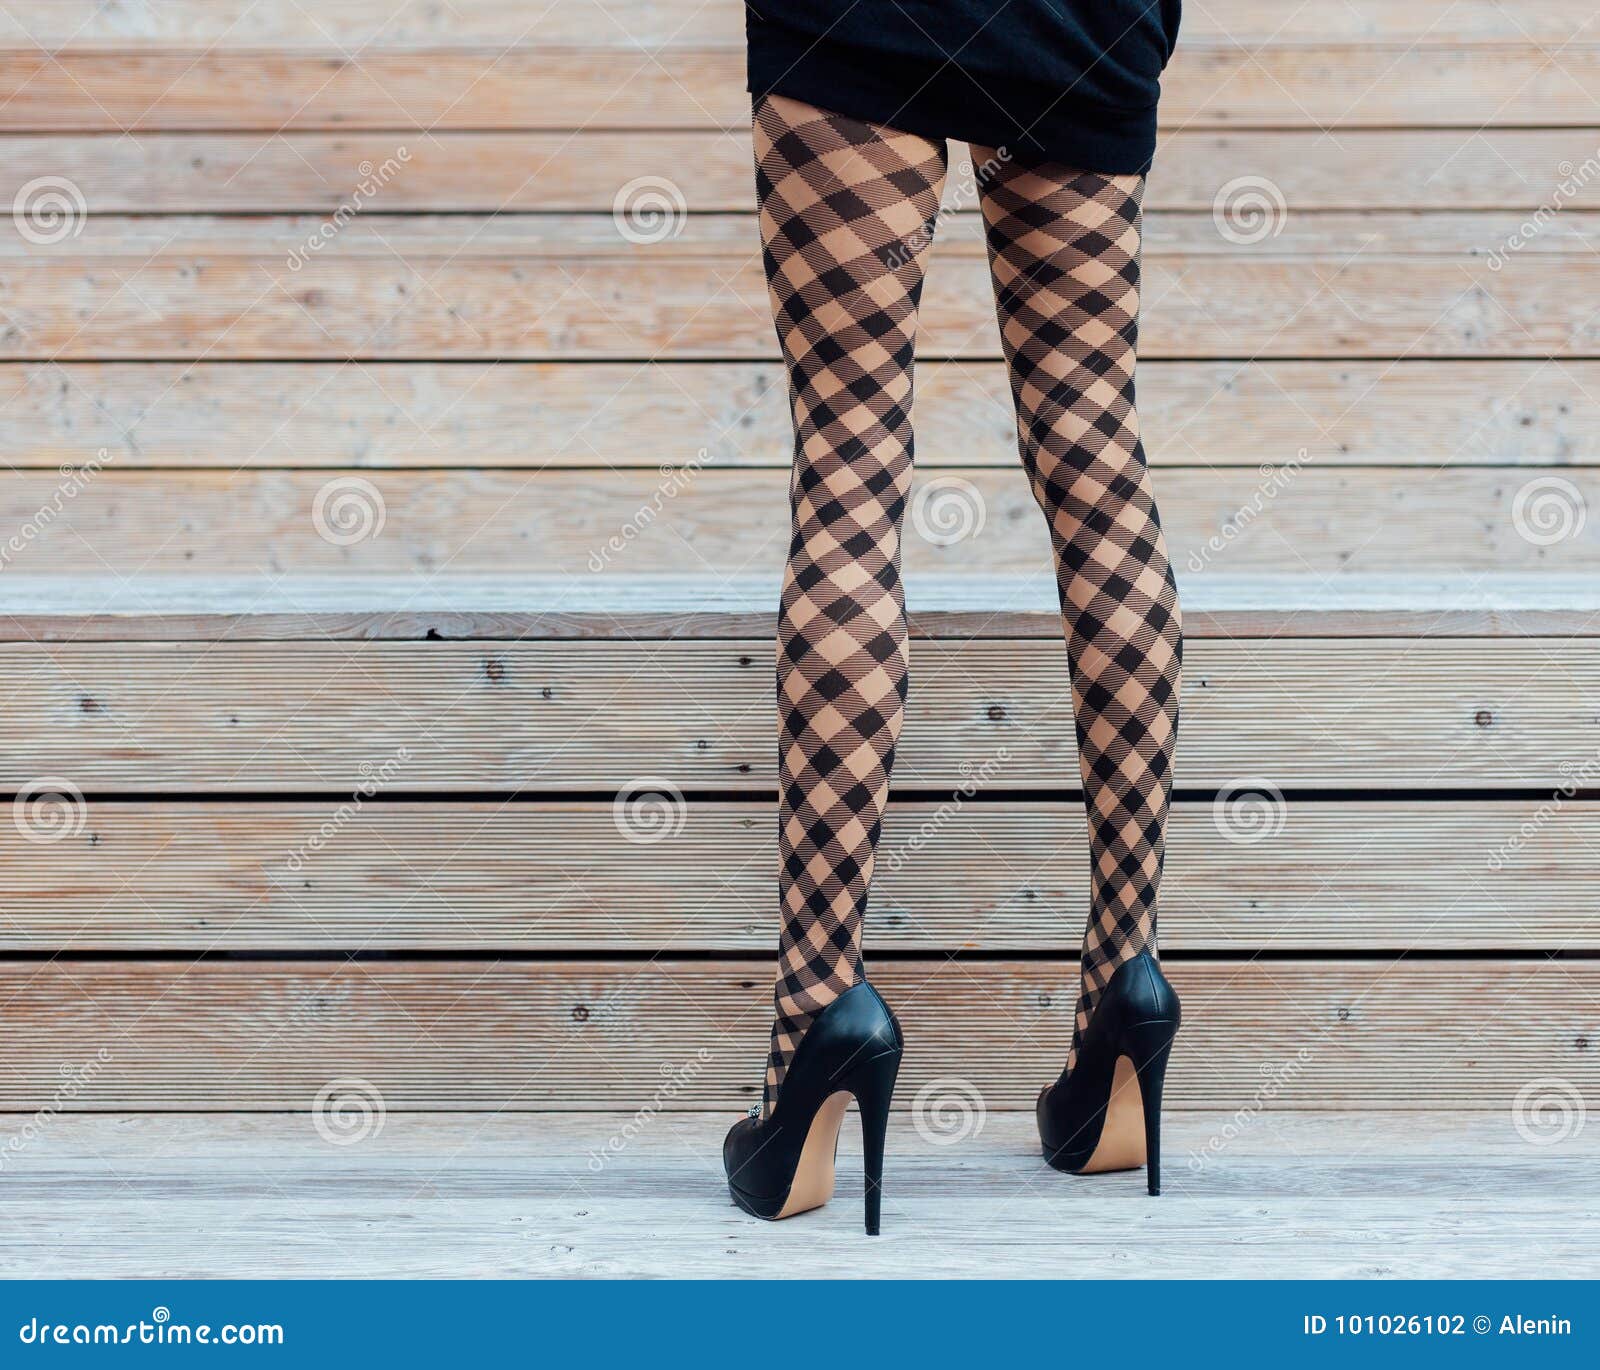 A Girl With Long Legs In Fashionable Fishnet Stockings A Short Black